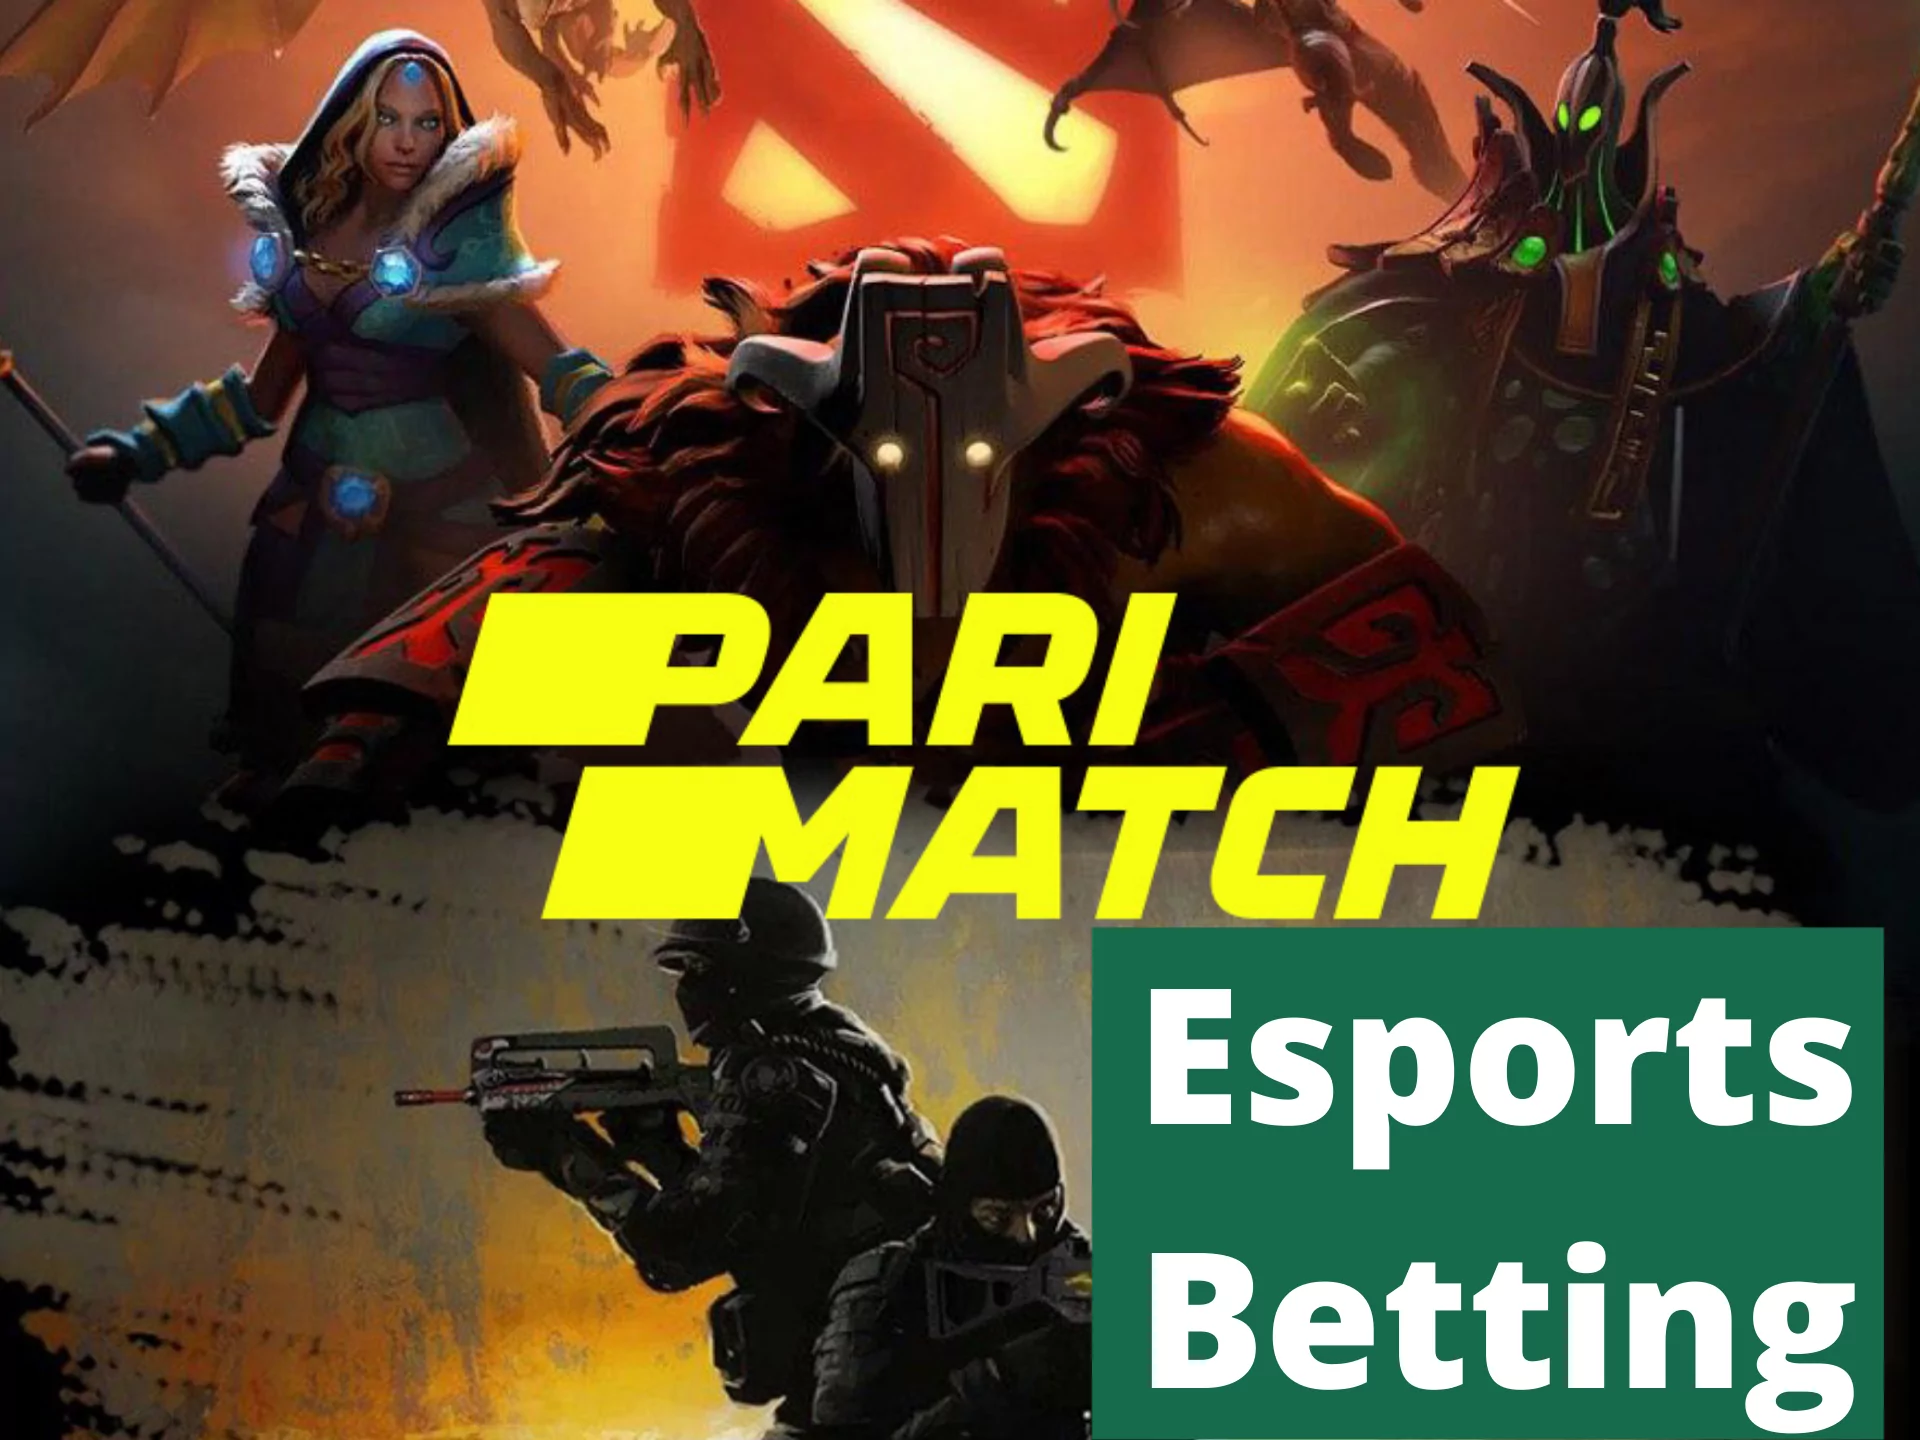 Bet on e-sports in Bangladesh with Parimatch app.